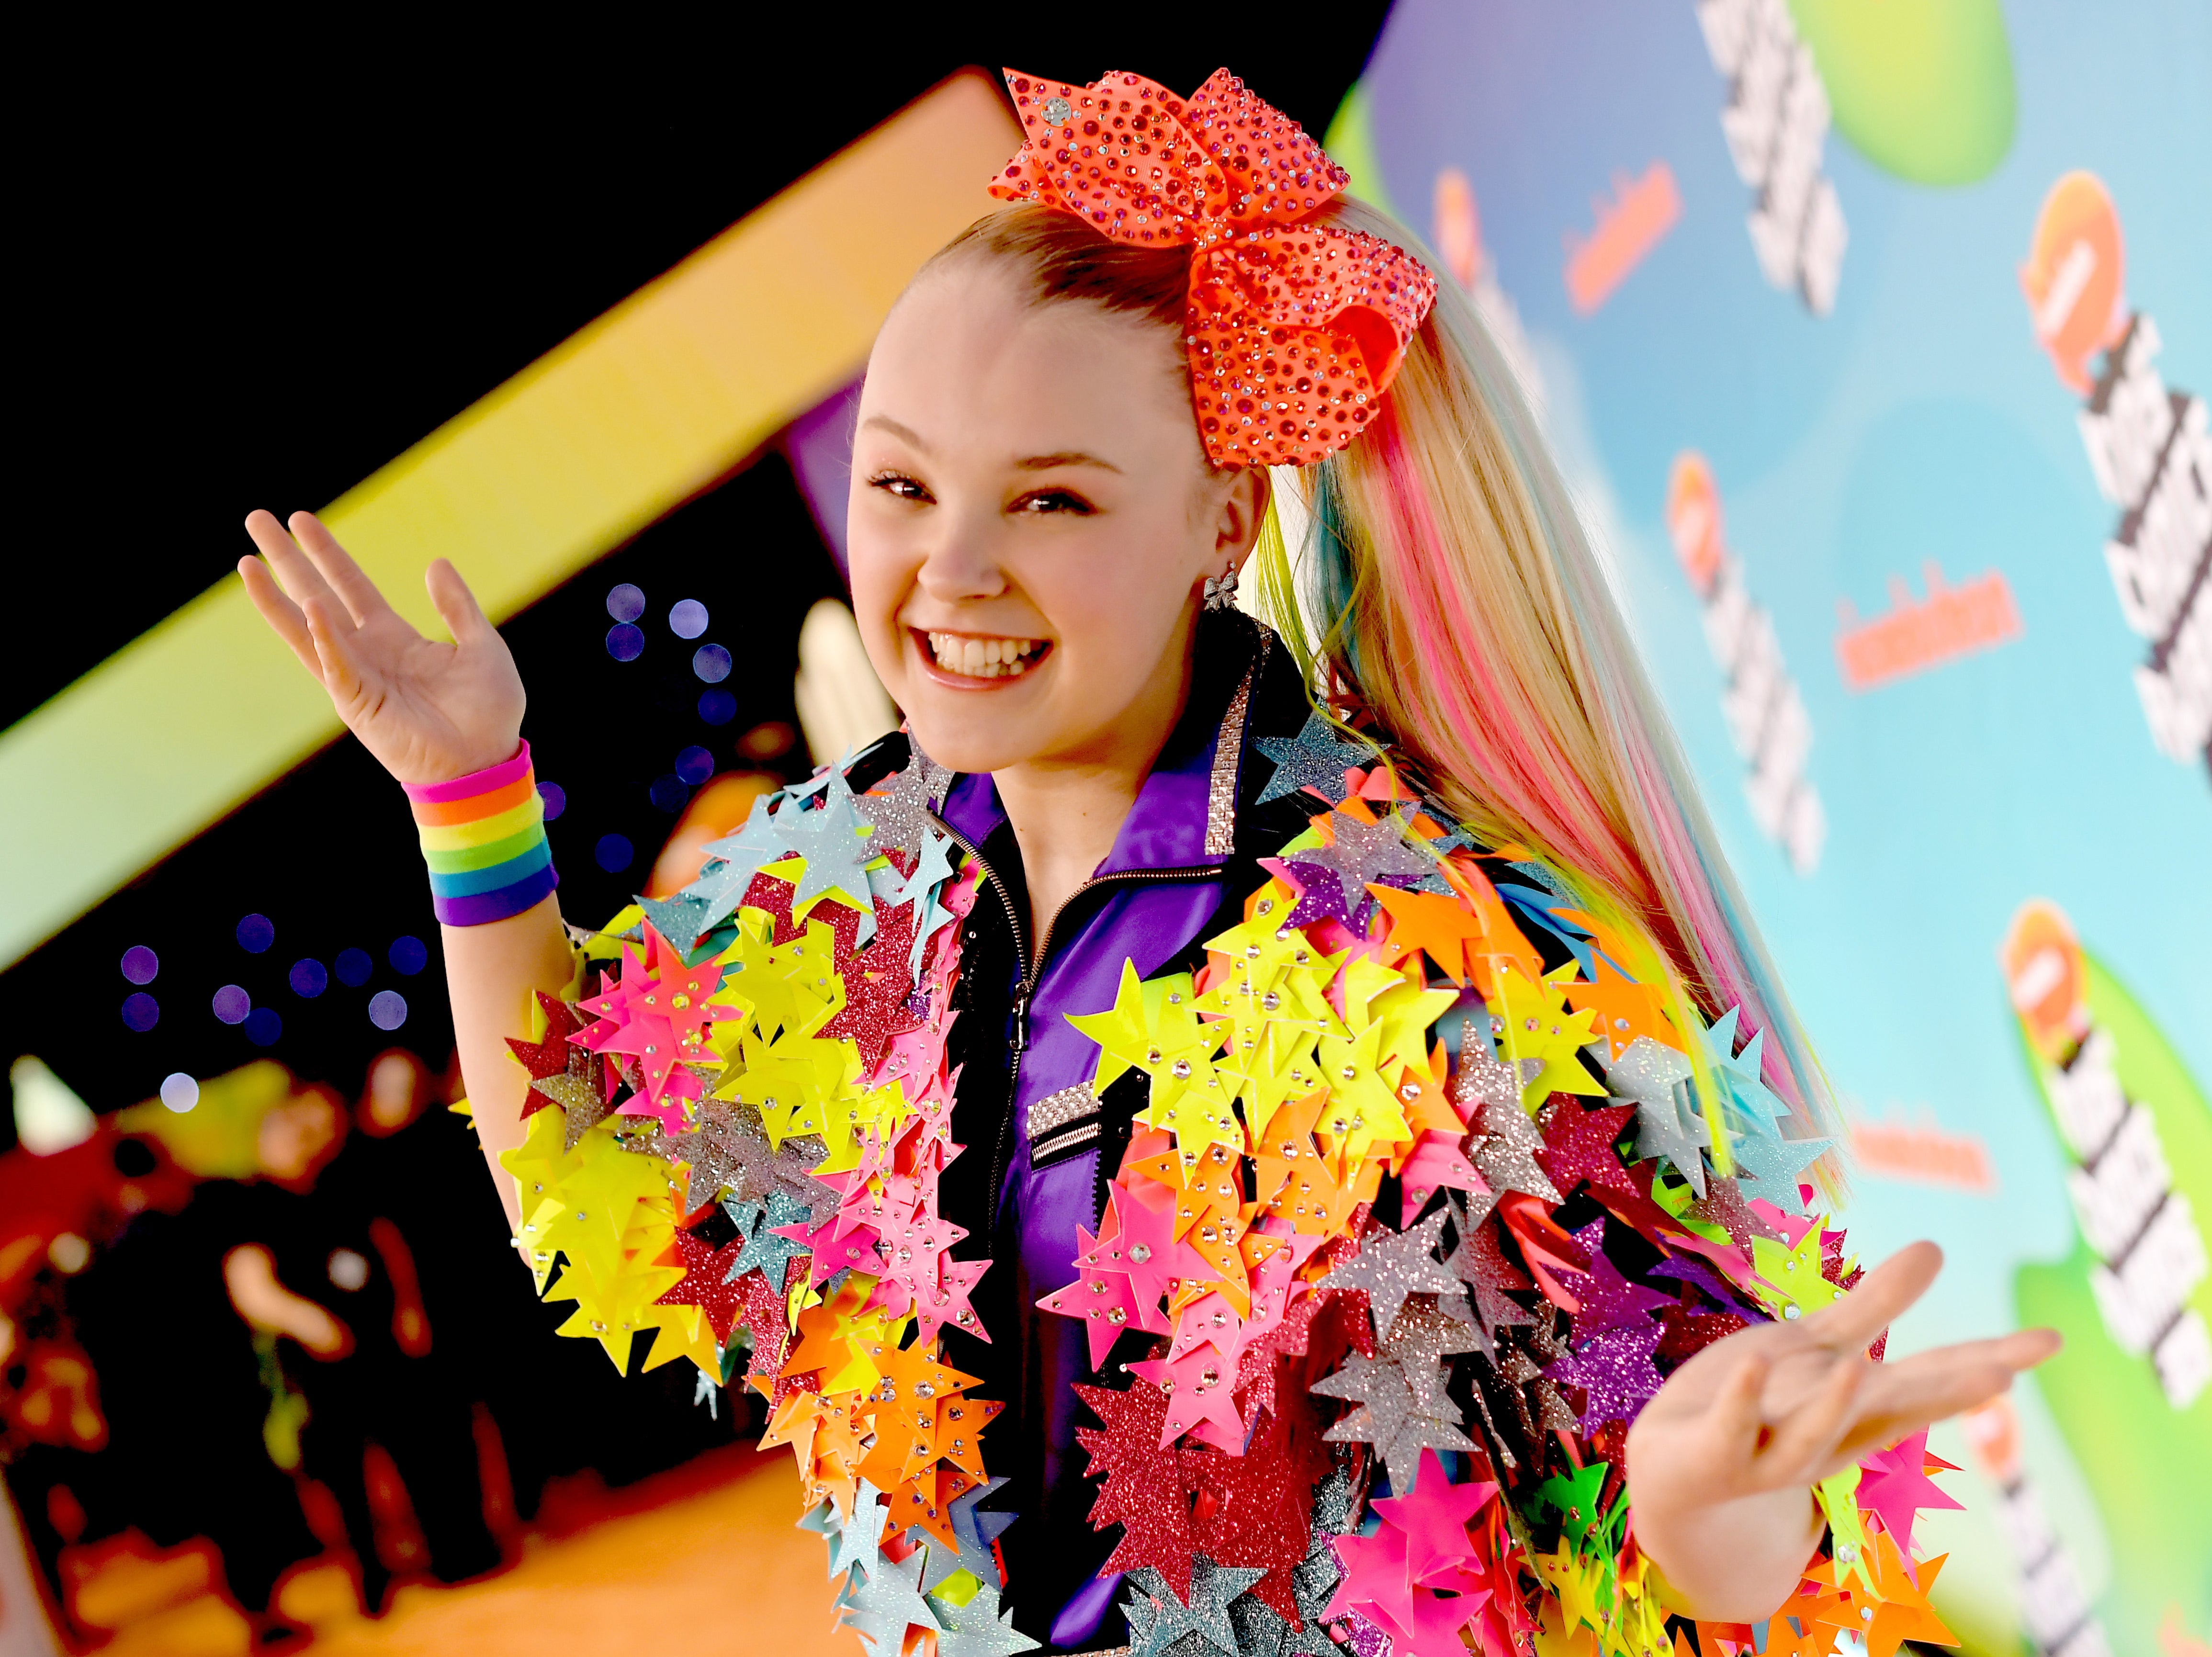 Jojo Siwa Wants A Scene Where She Kissed A Man Removed From An Upcoming